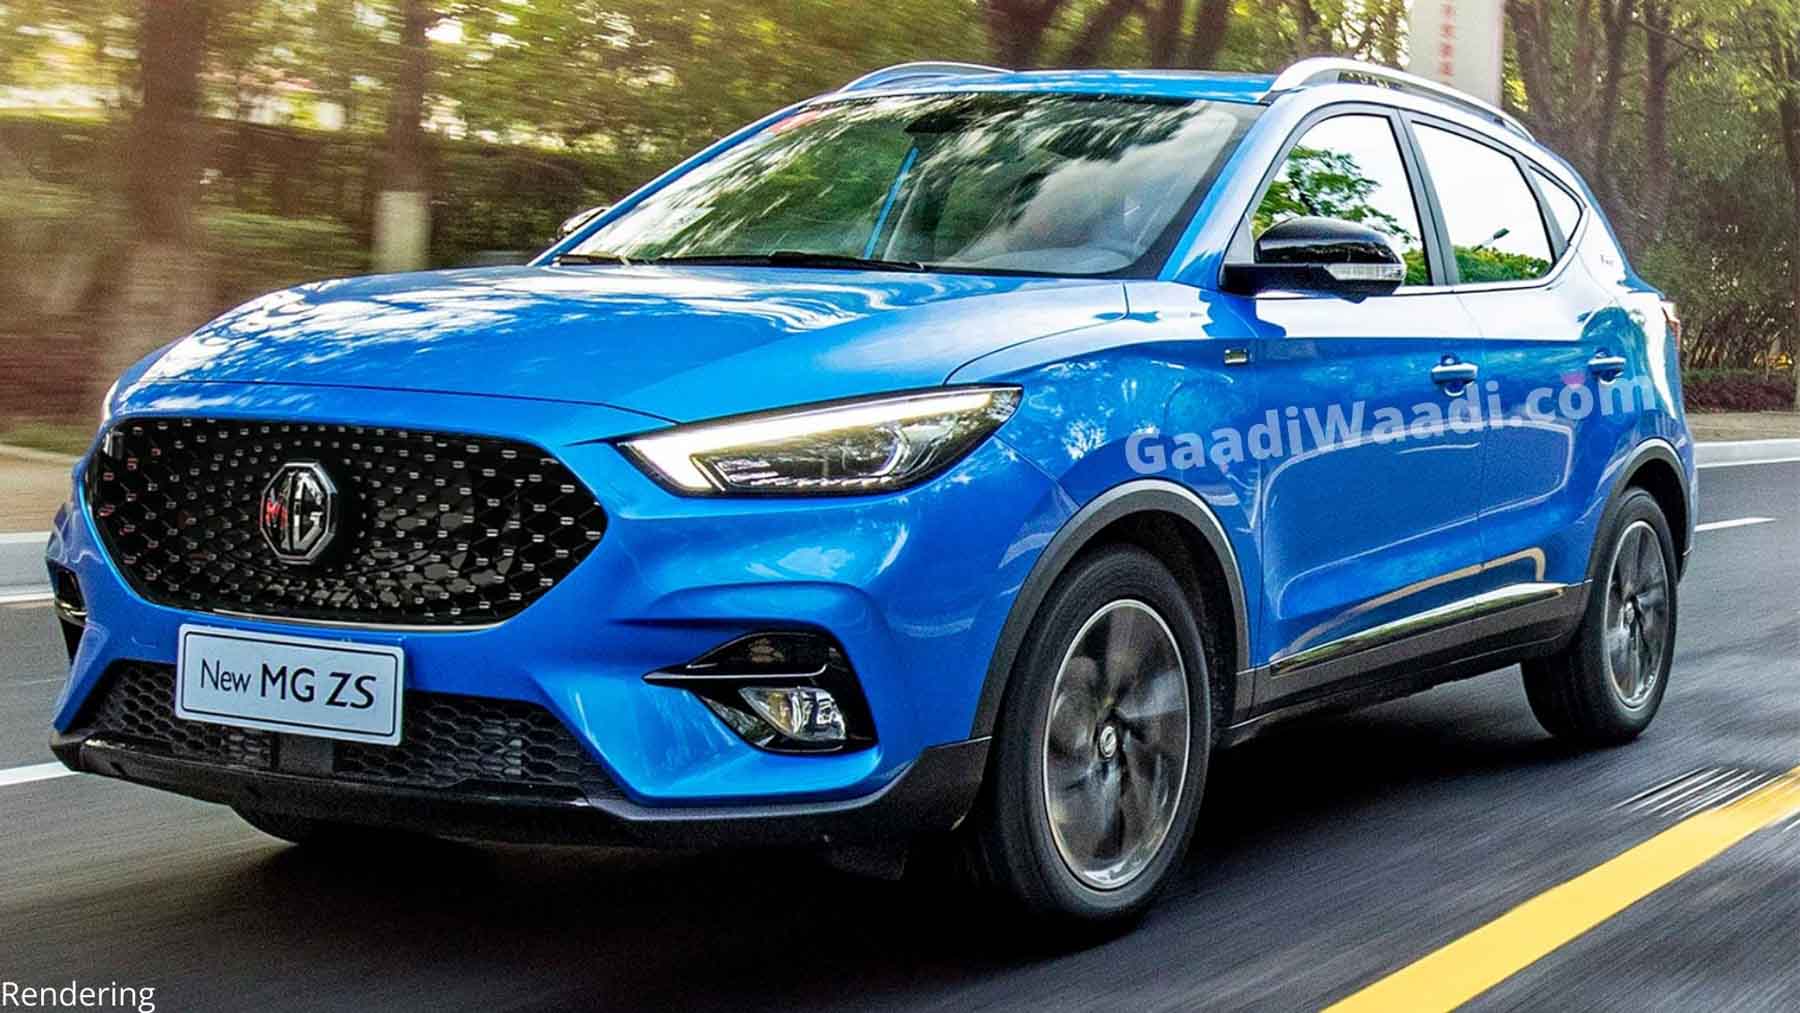 2022 MG ZS EV To Debut This Year With New Design & Higher Range